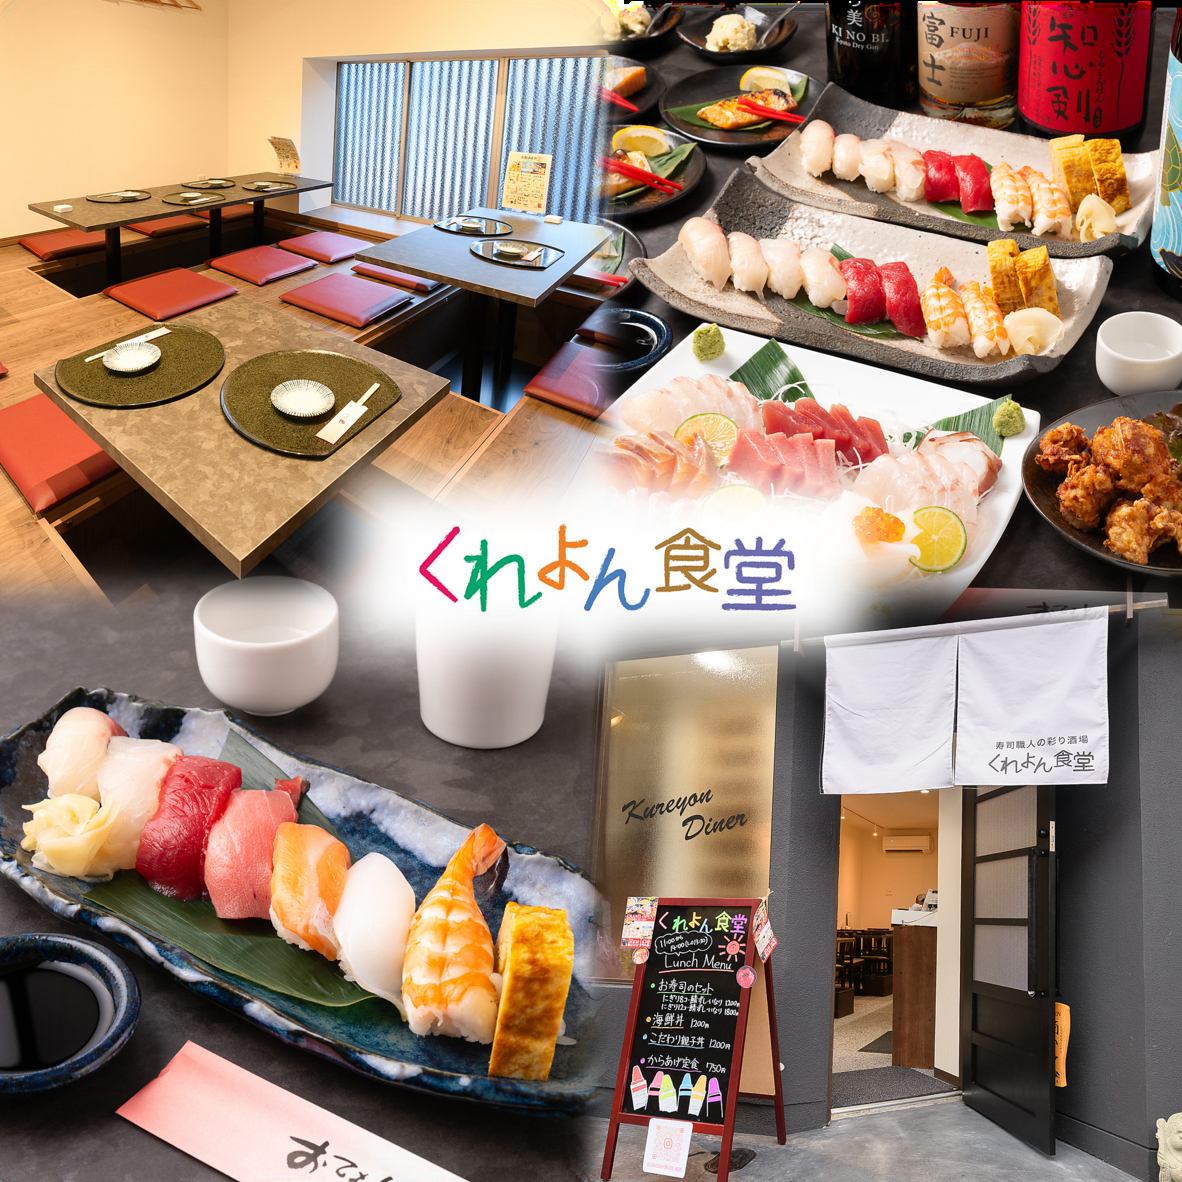 We can accommodate everything from casual meals to banquets♪ Enjoy the special dishes prepared by our sushi chefs!